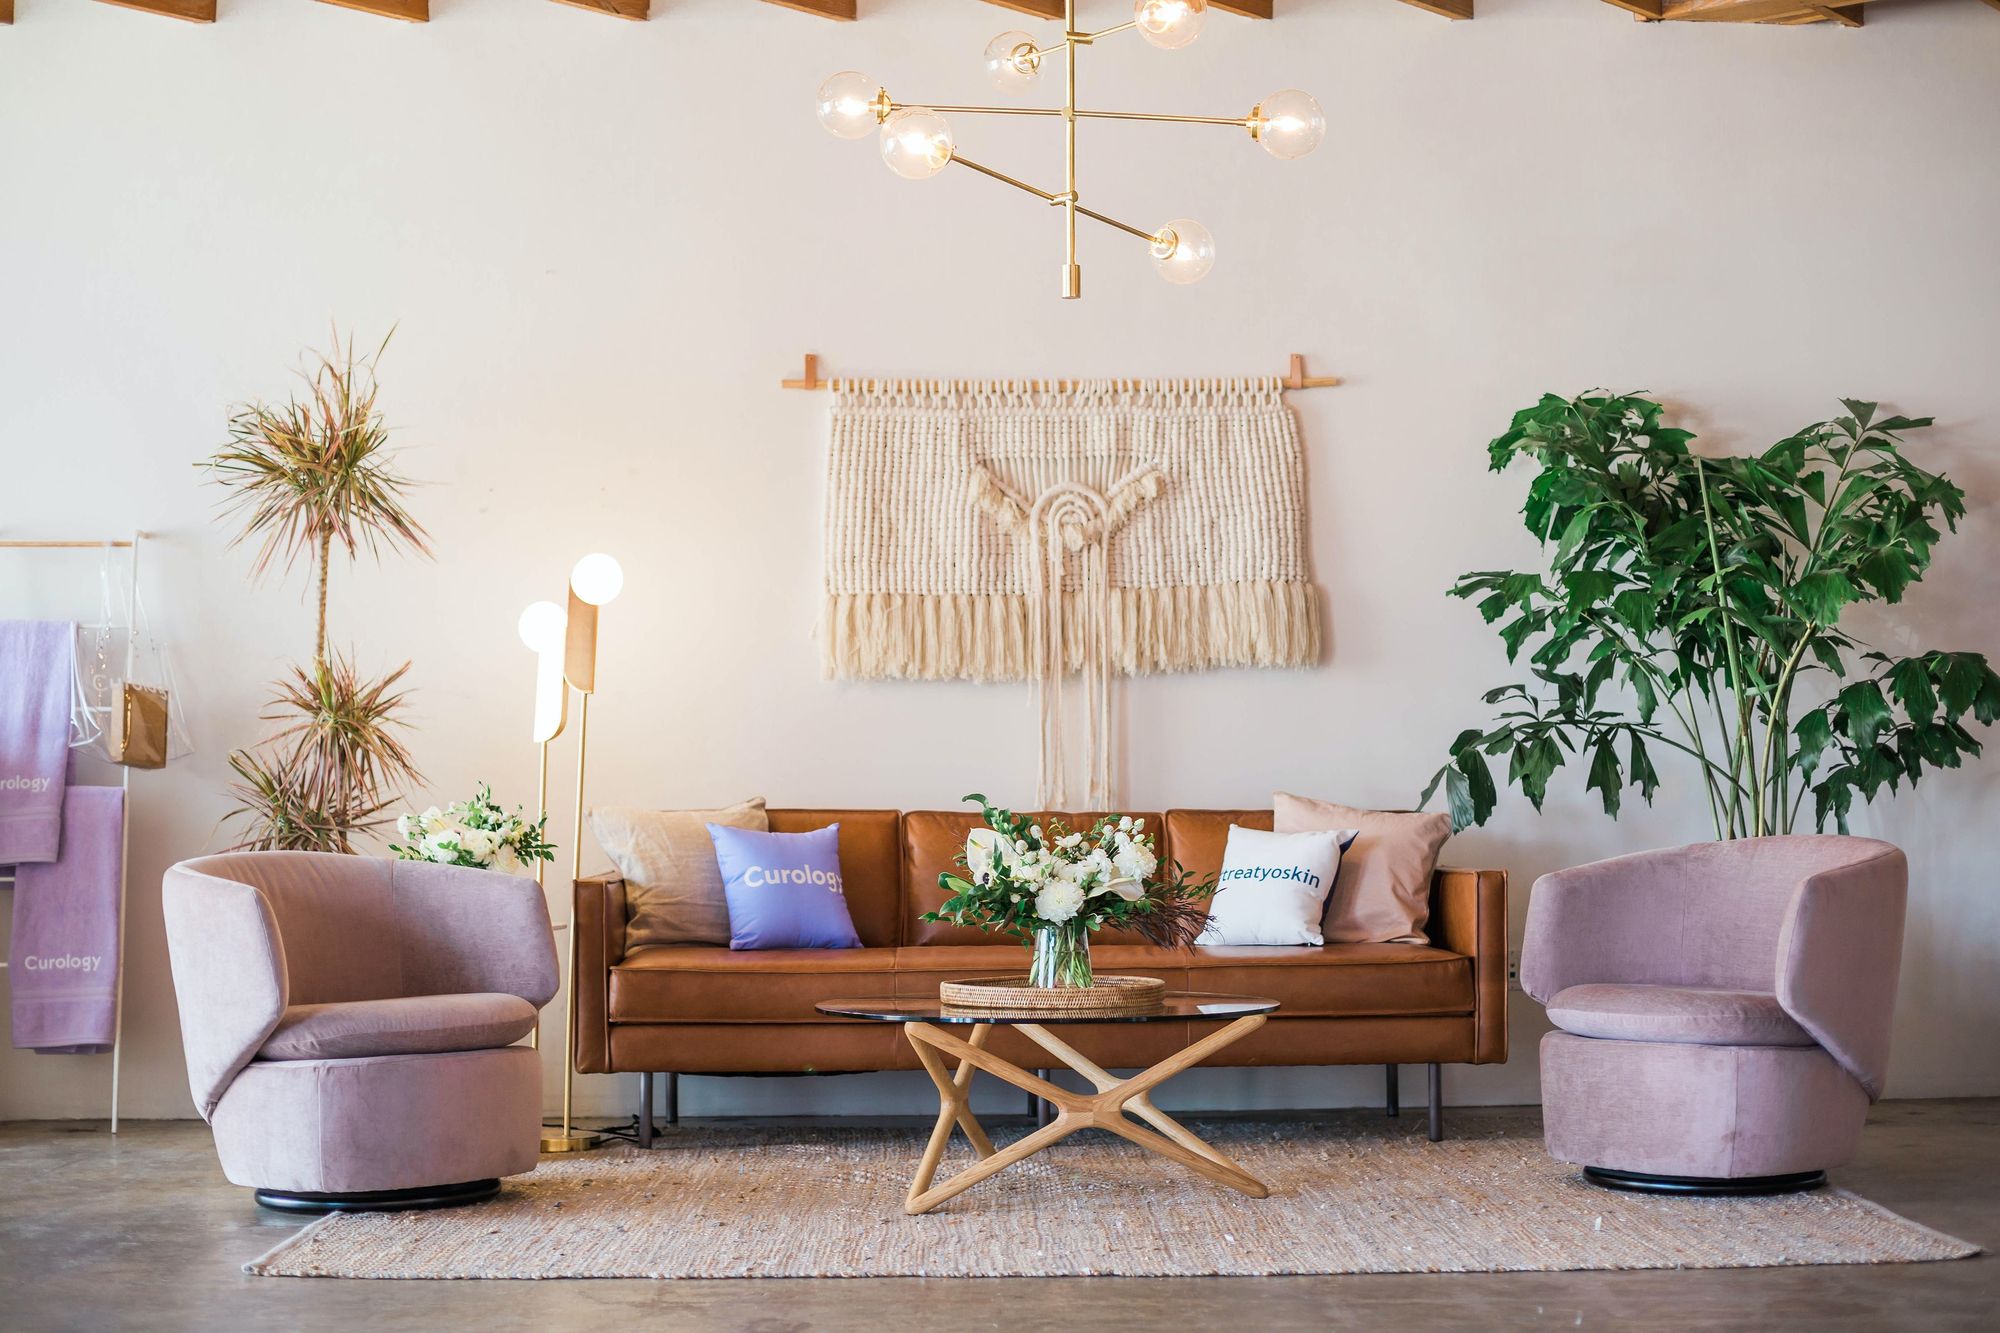 Colorful Boho living room with mix of patterns, textures, and greenery